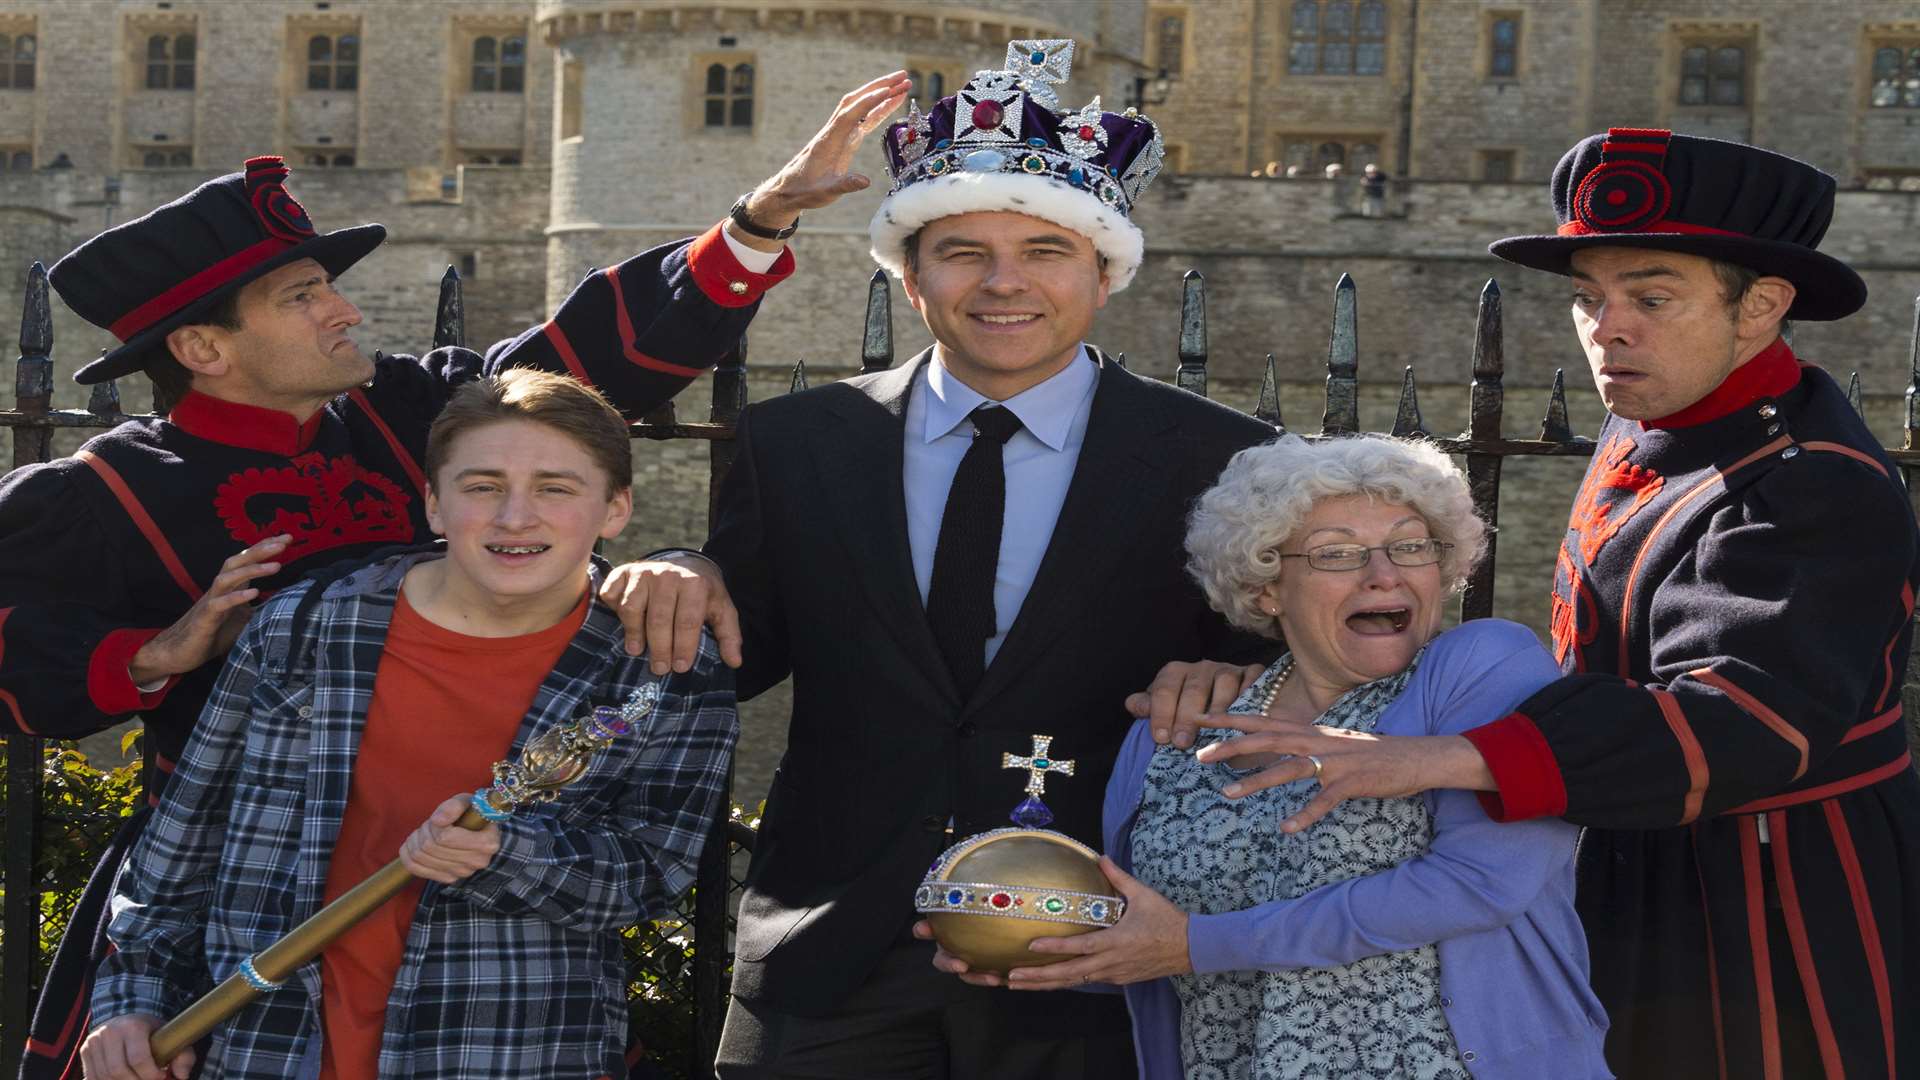 David Walliams launches Gangsta Granny. Picture: Ray Tang/Rex Shutterstock